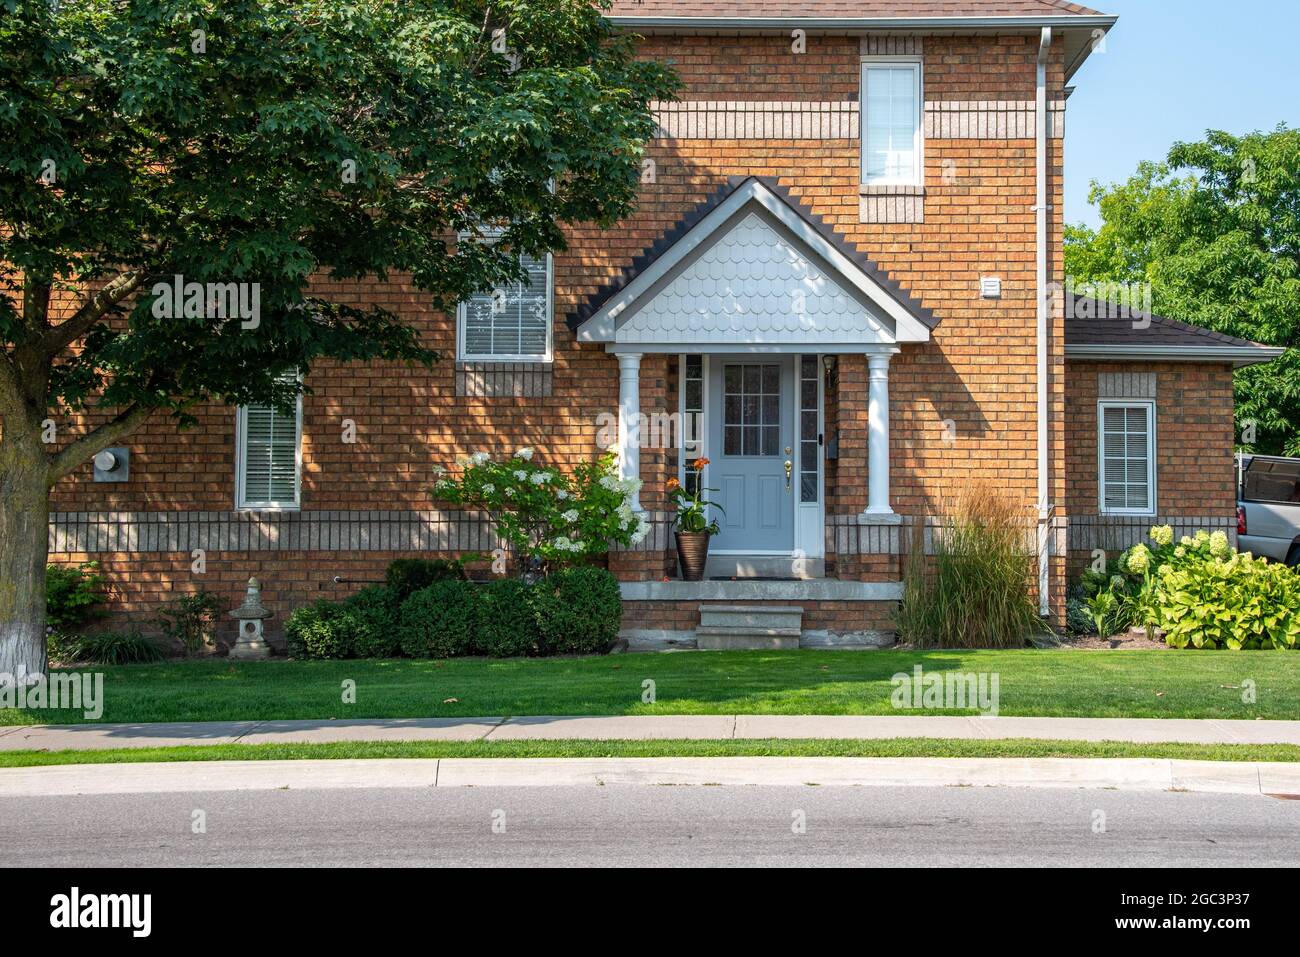 Typical door entrance of a brick house in the City of Pickering in Ontario, Canada Stock Photo